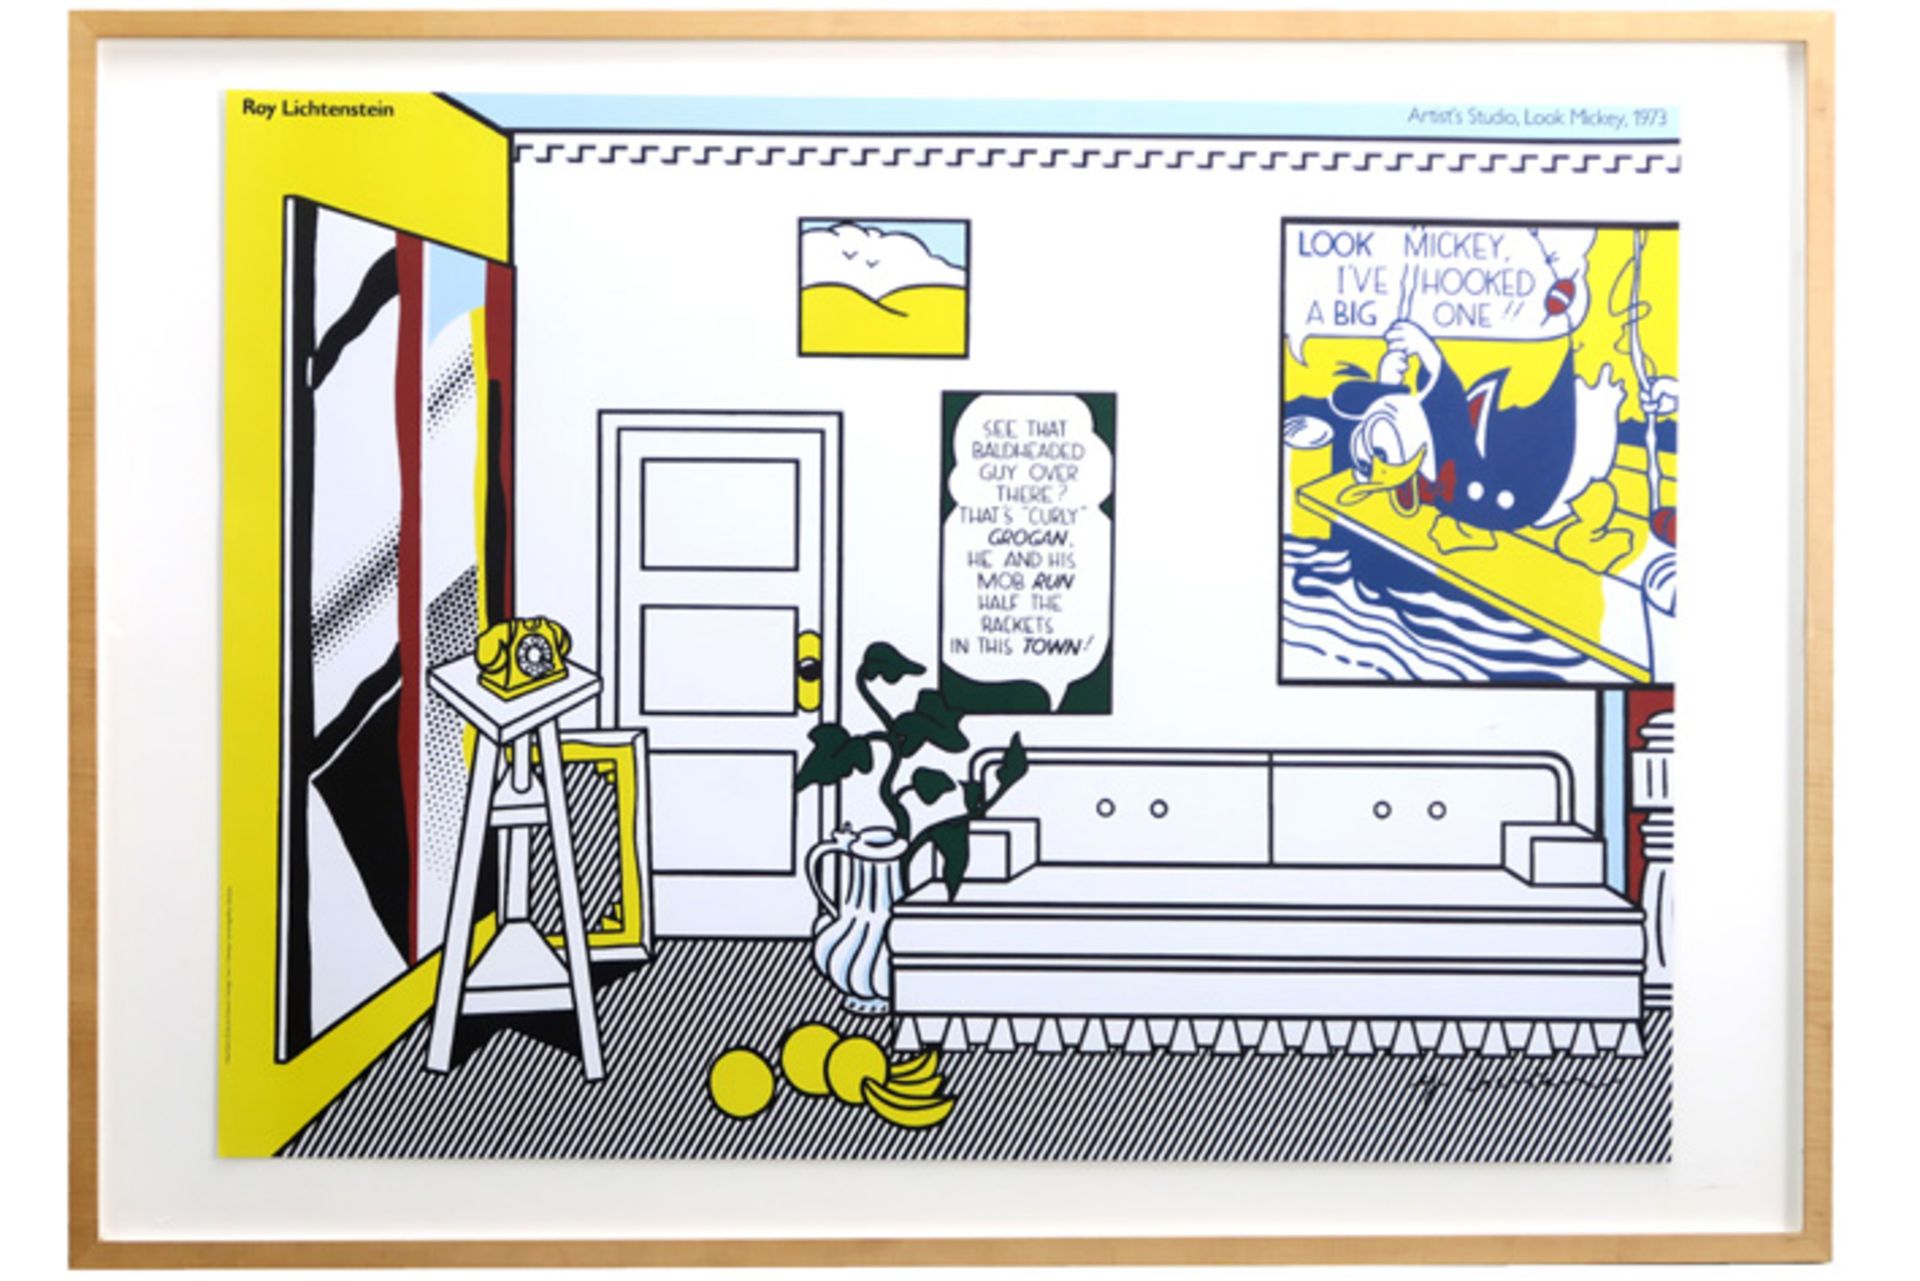 Roy Lichtenstein handsigned print/poster with the representation of Donald Duck, titled "Look Mickey - Image 3 of 3